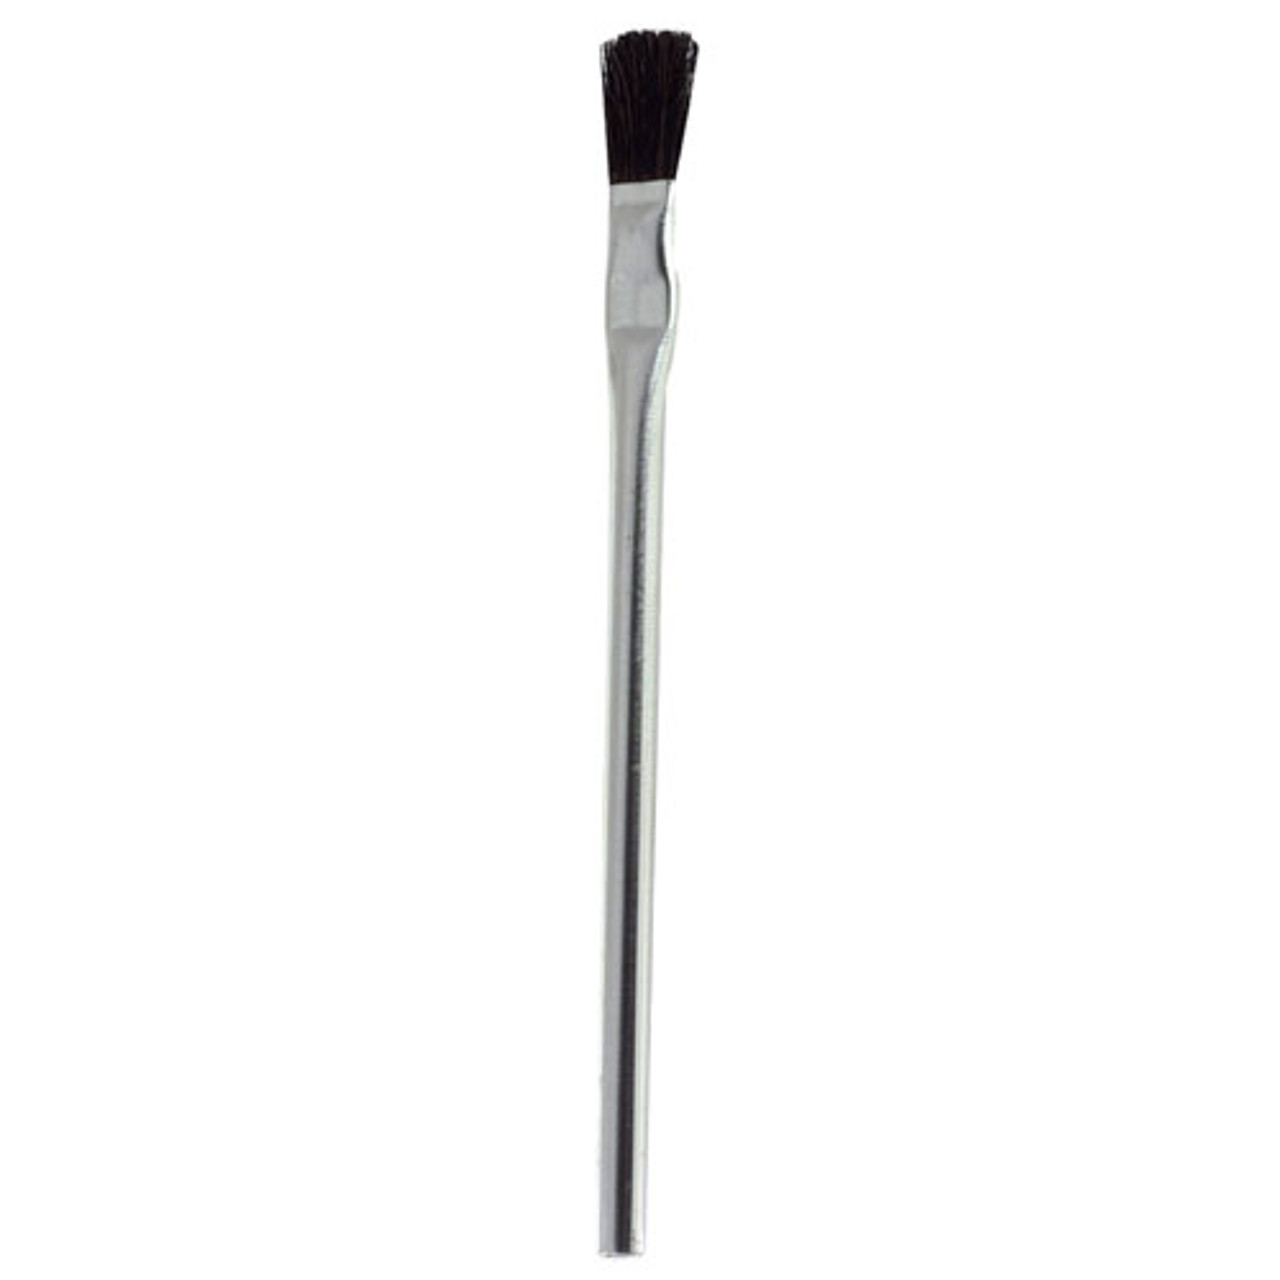 12 pc. Disposable Acid Brush for Craft,Glue,Epoxy,Paint,Flux brush and more